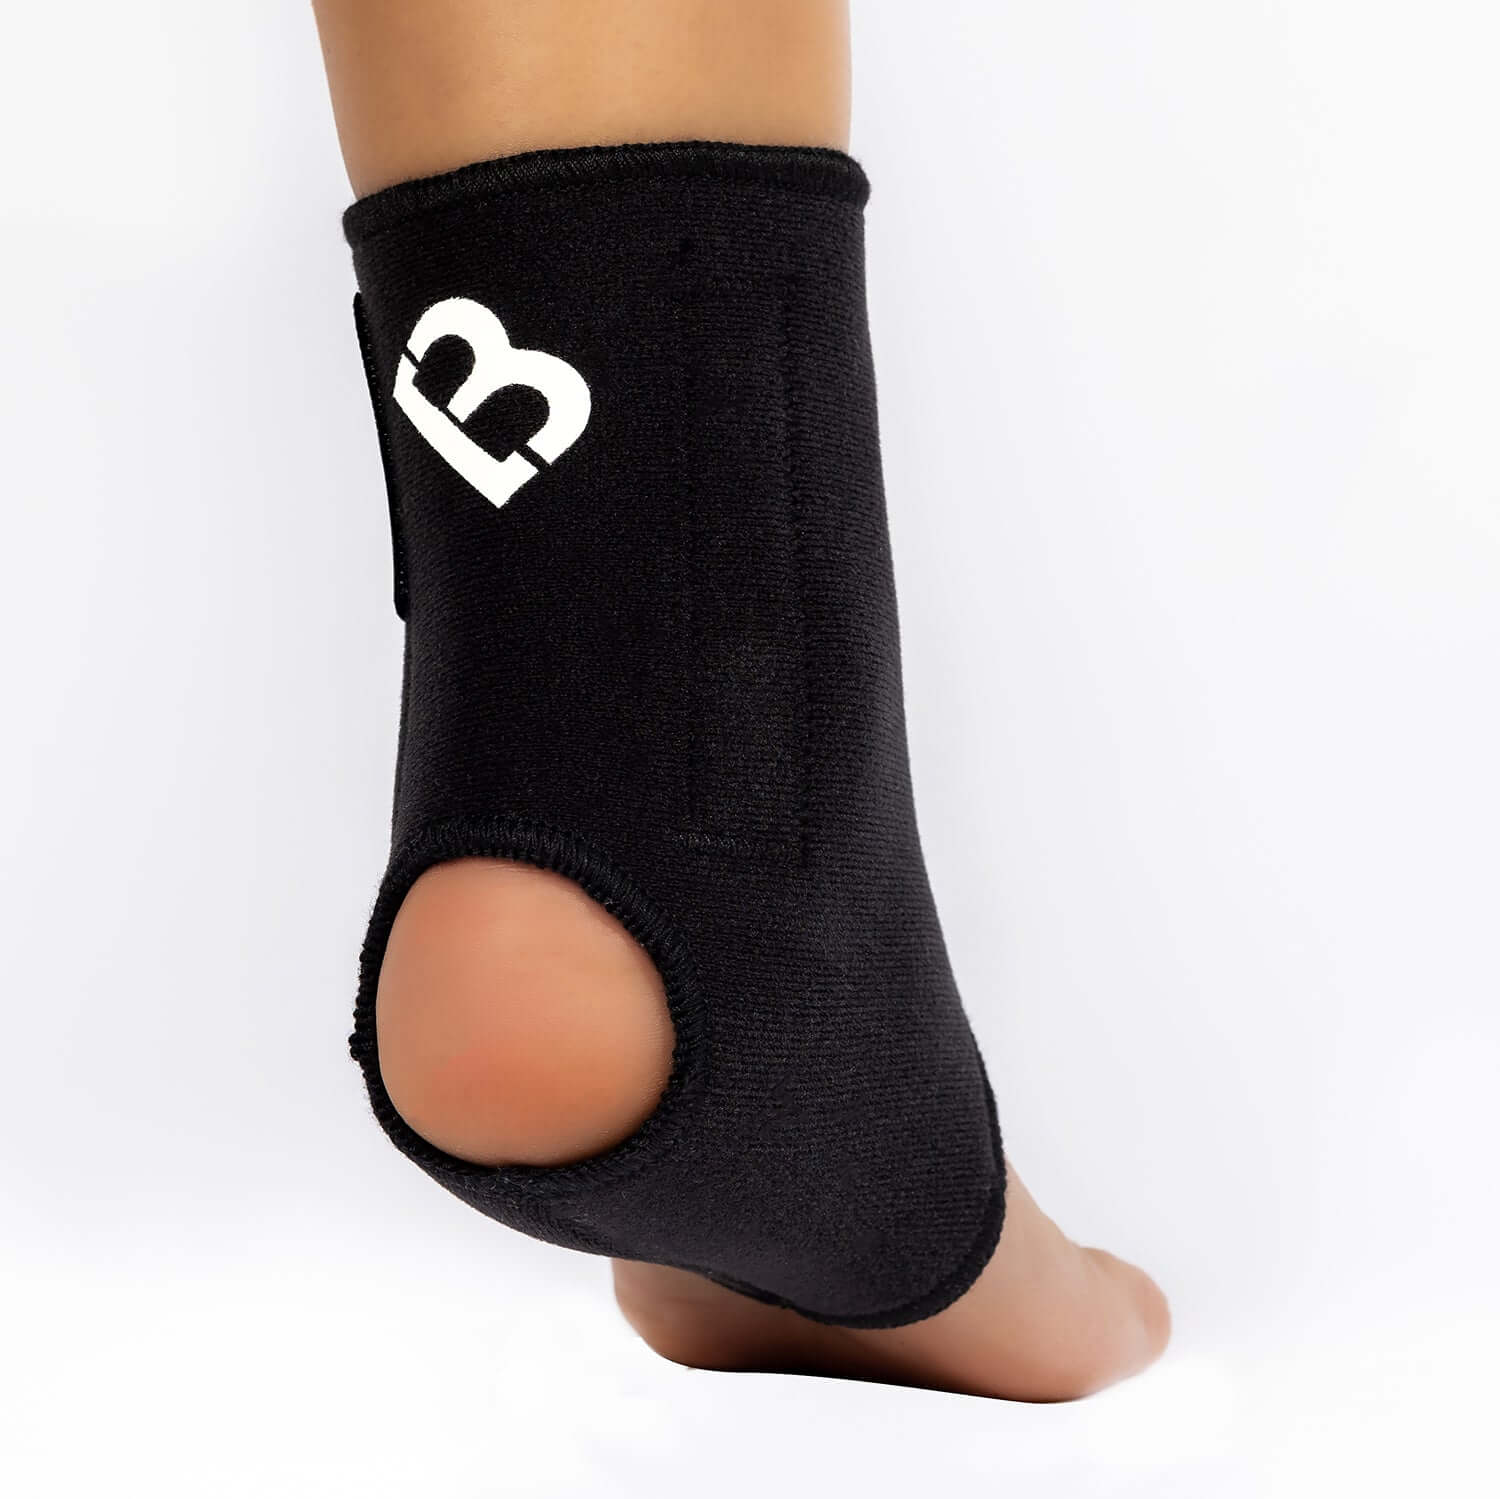 The Bio Magnetic Ankle Support in Black being worn on the right foot with the view from the back, showing the heel hole for added comfort. The 8 therapeutic magnets can be seen sewn into the sides of the support around the ankle. 